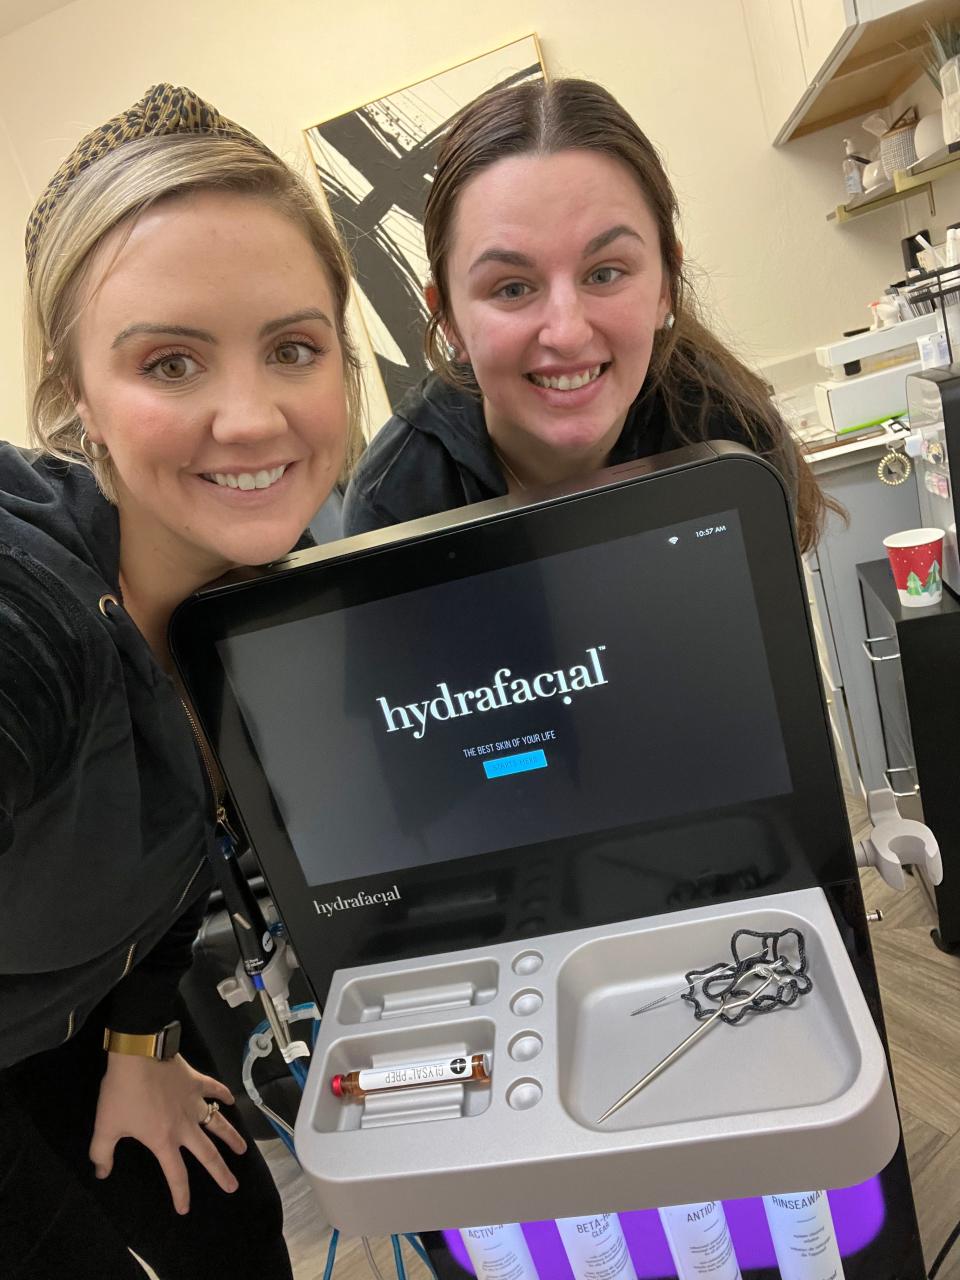 Meghan Hanna (left) and Jenna Hester (right) pose with their HydraFacial machine at Prim Aesthetics at 225 Ashmun St. in Sault Ste. Marie, which they will be able to pay off using a $25,000 grant from the Michigan Economic Development Corporation’s Match on Main grant program.